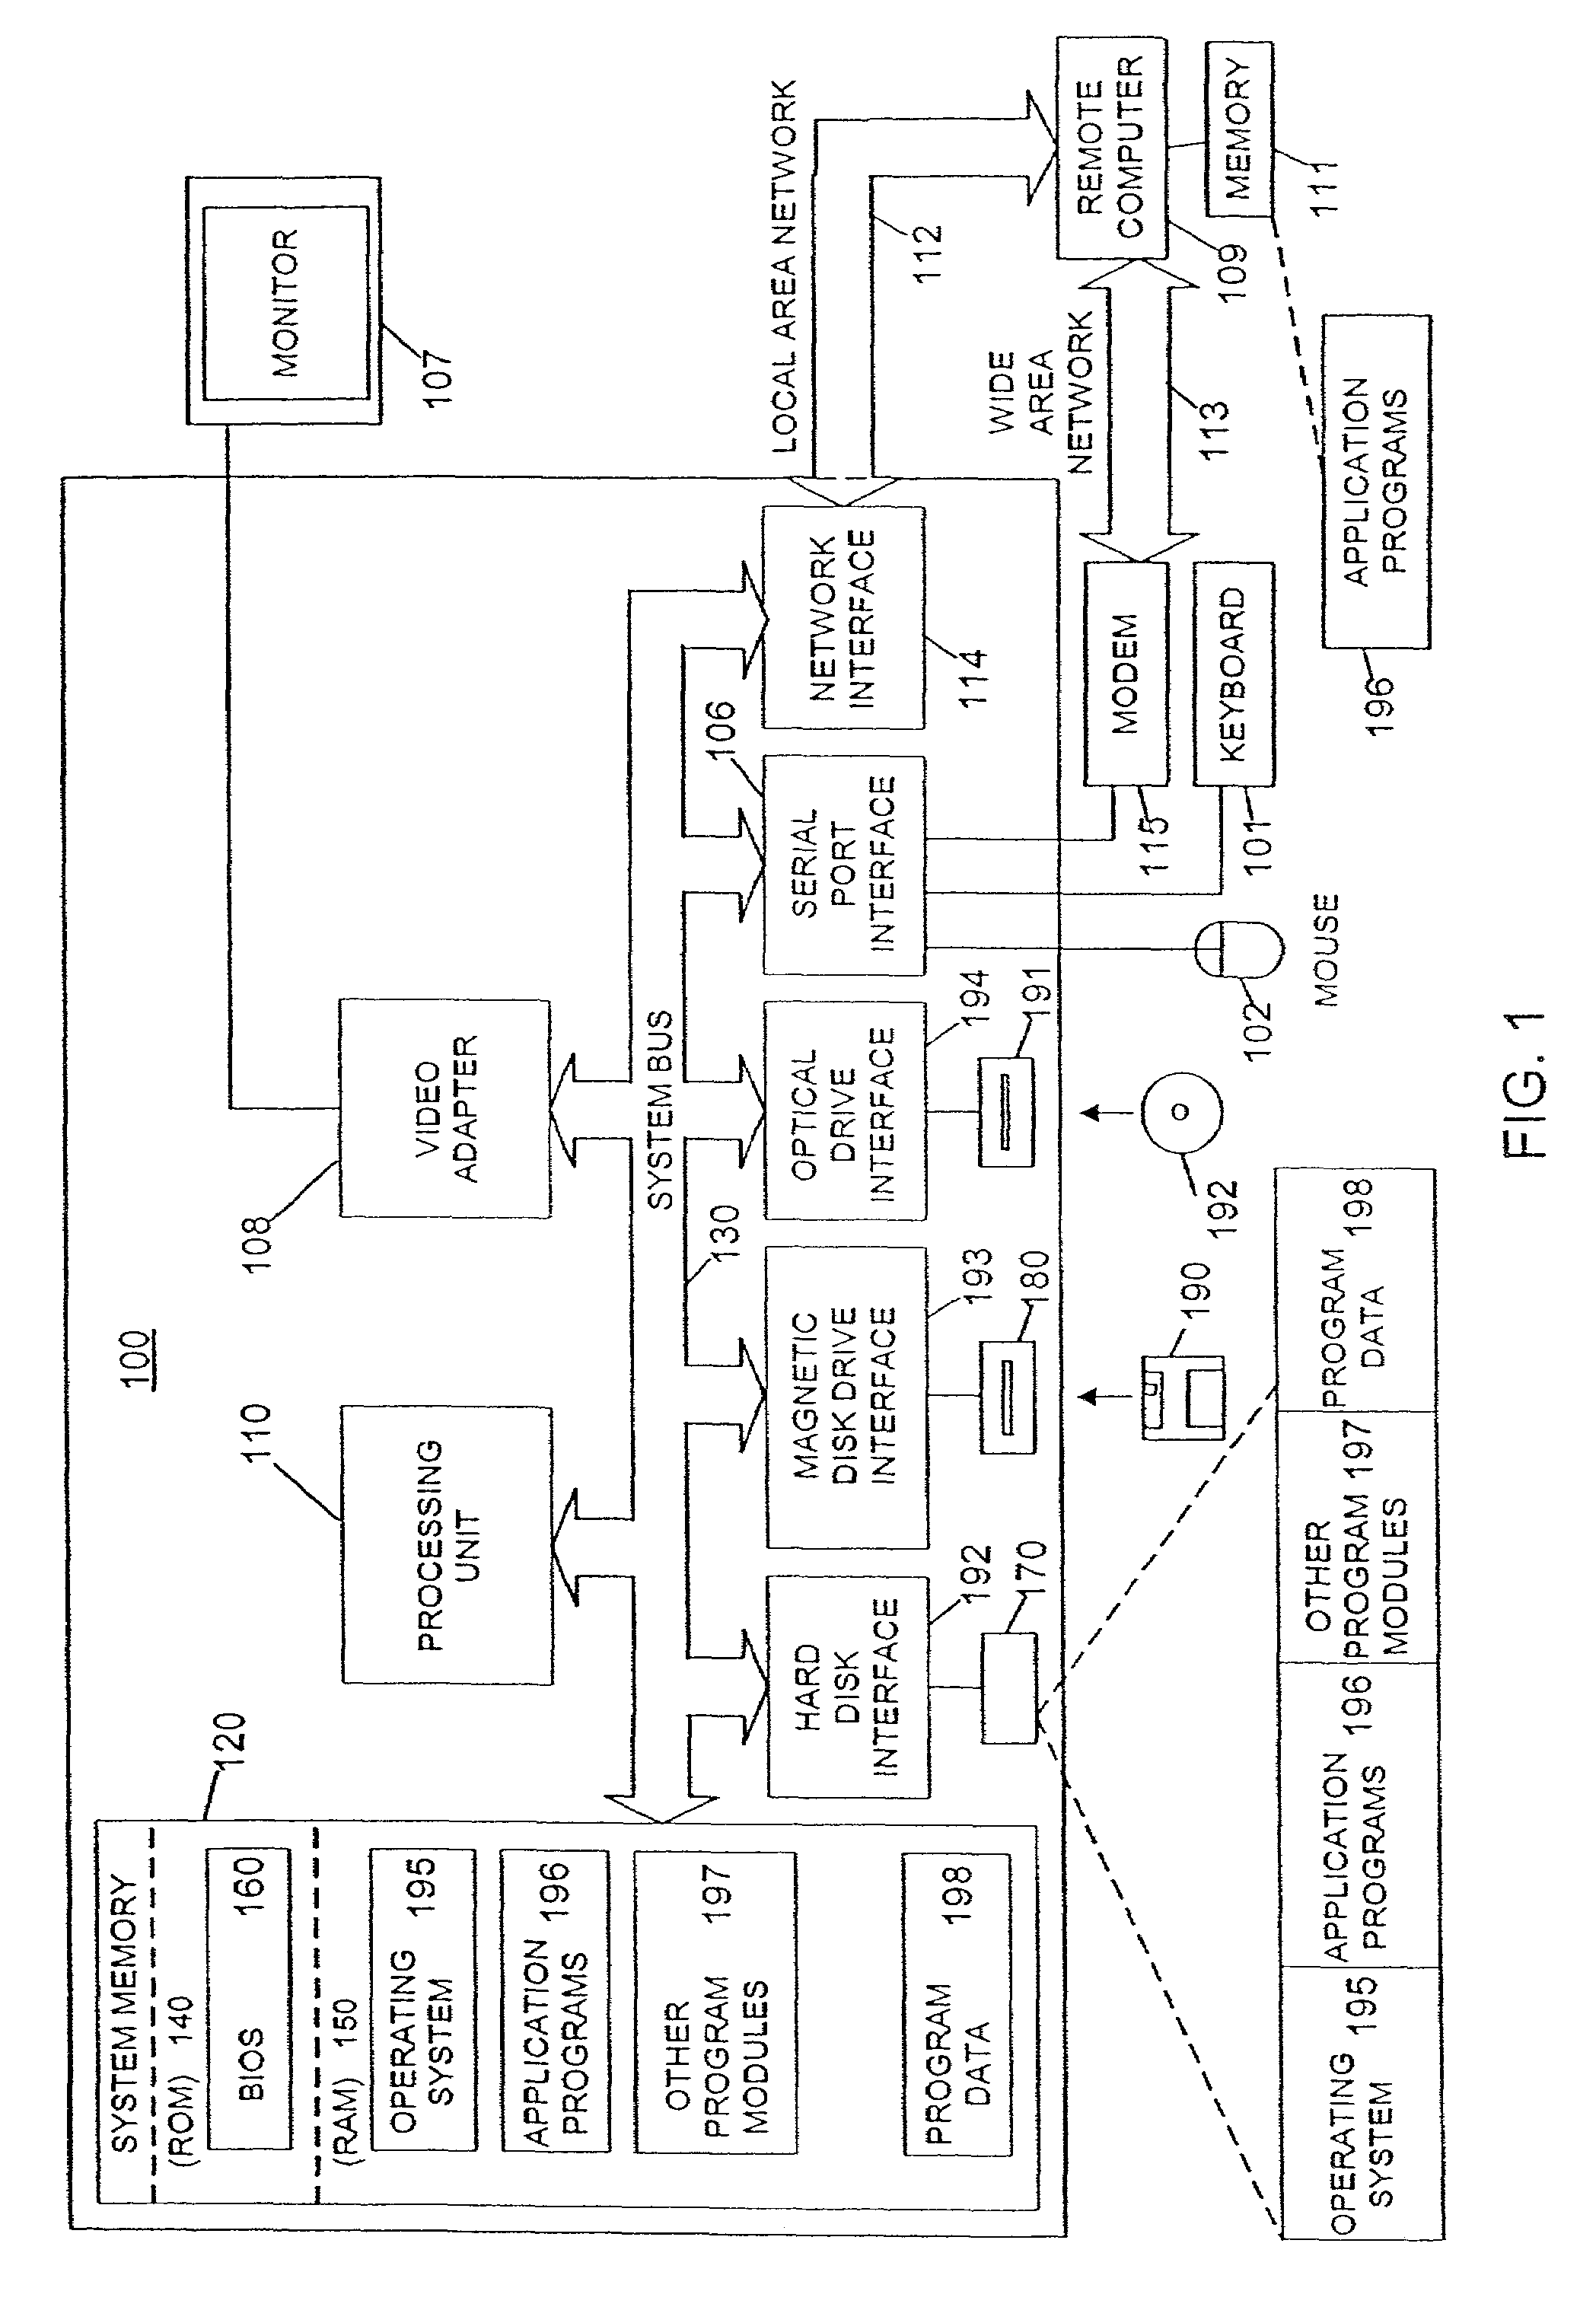 Method and apparatus for synchronizing multiple versions of digital data